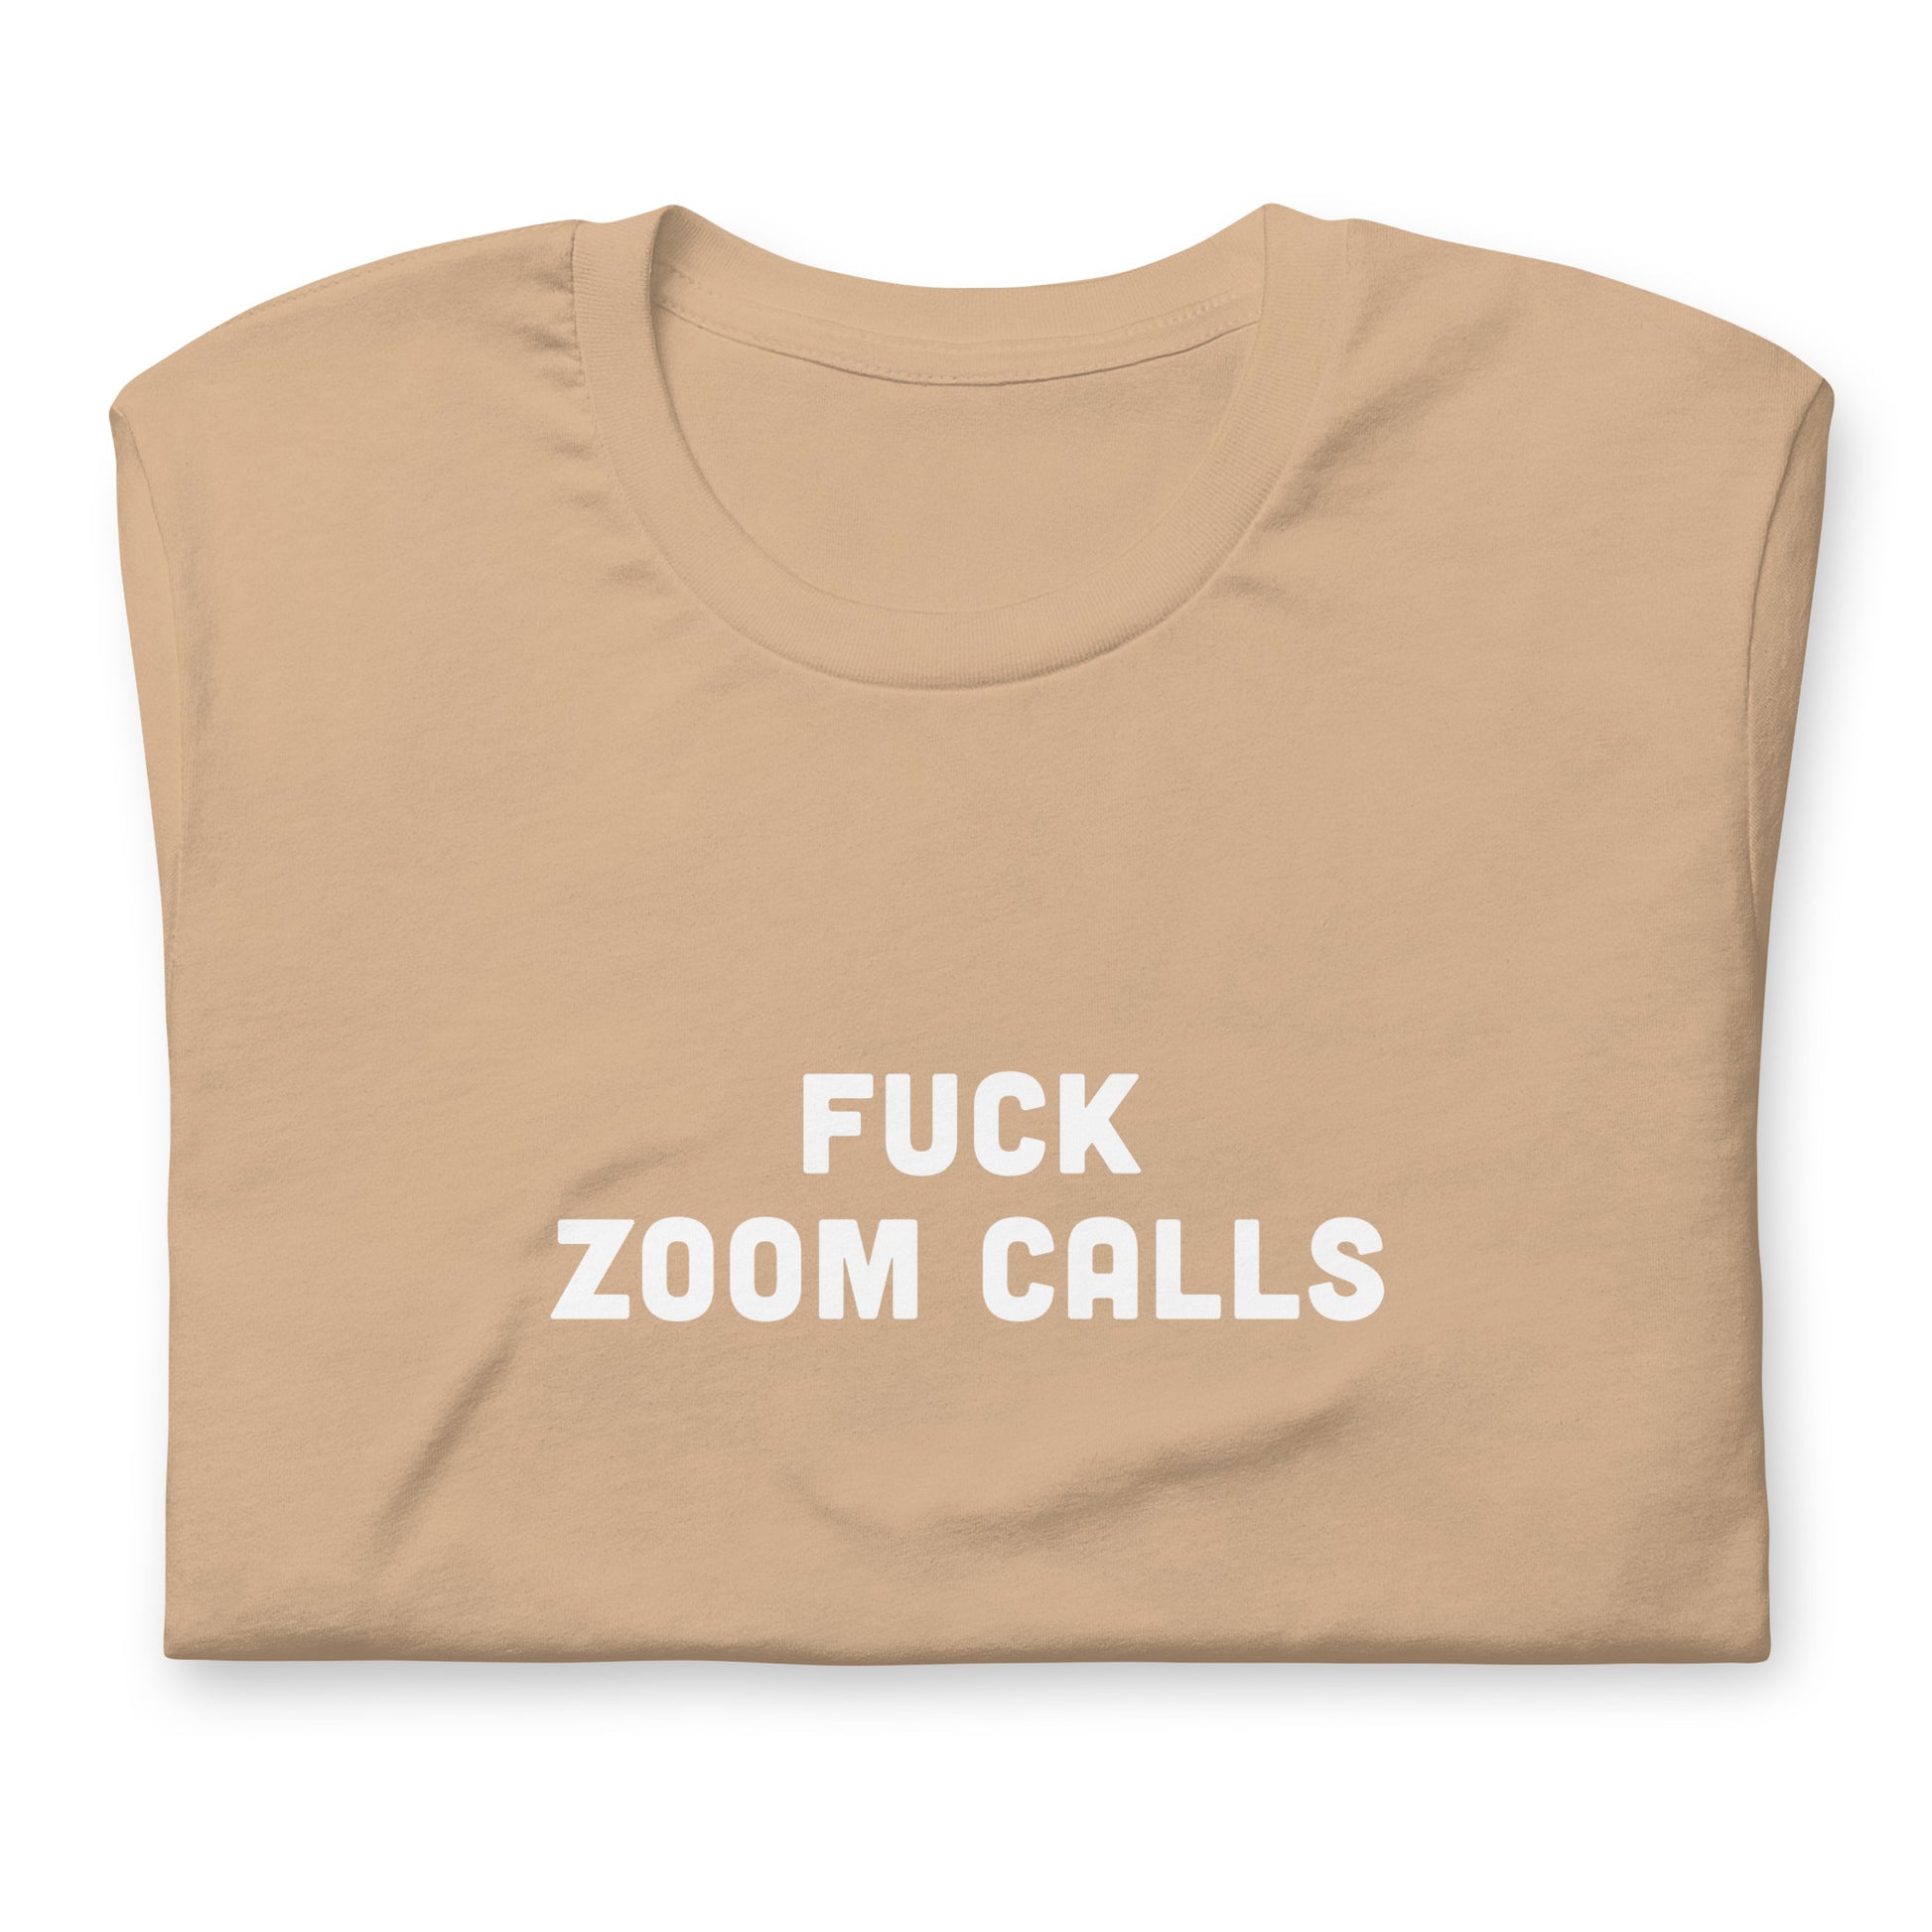 Fuck Zoom Calls T-Shirt Size XL Color Forest